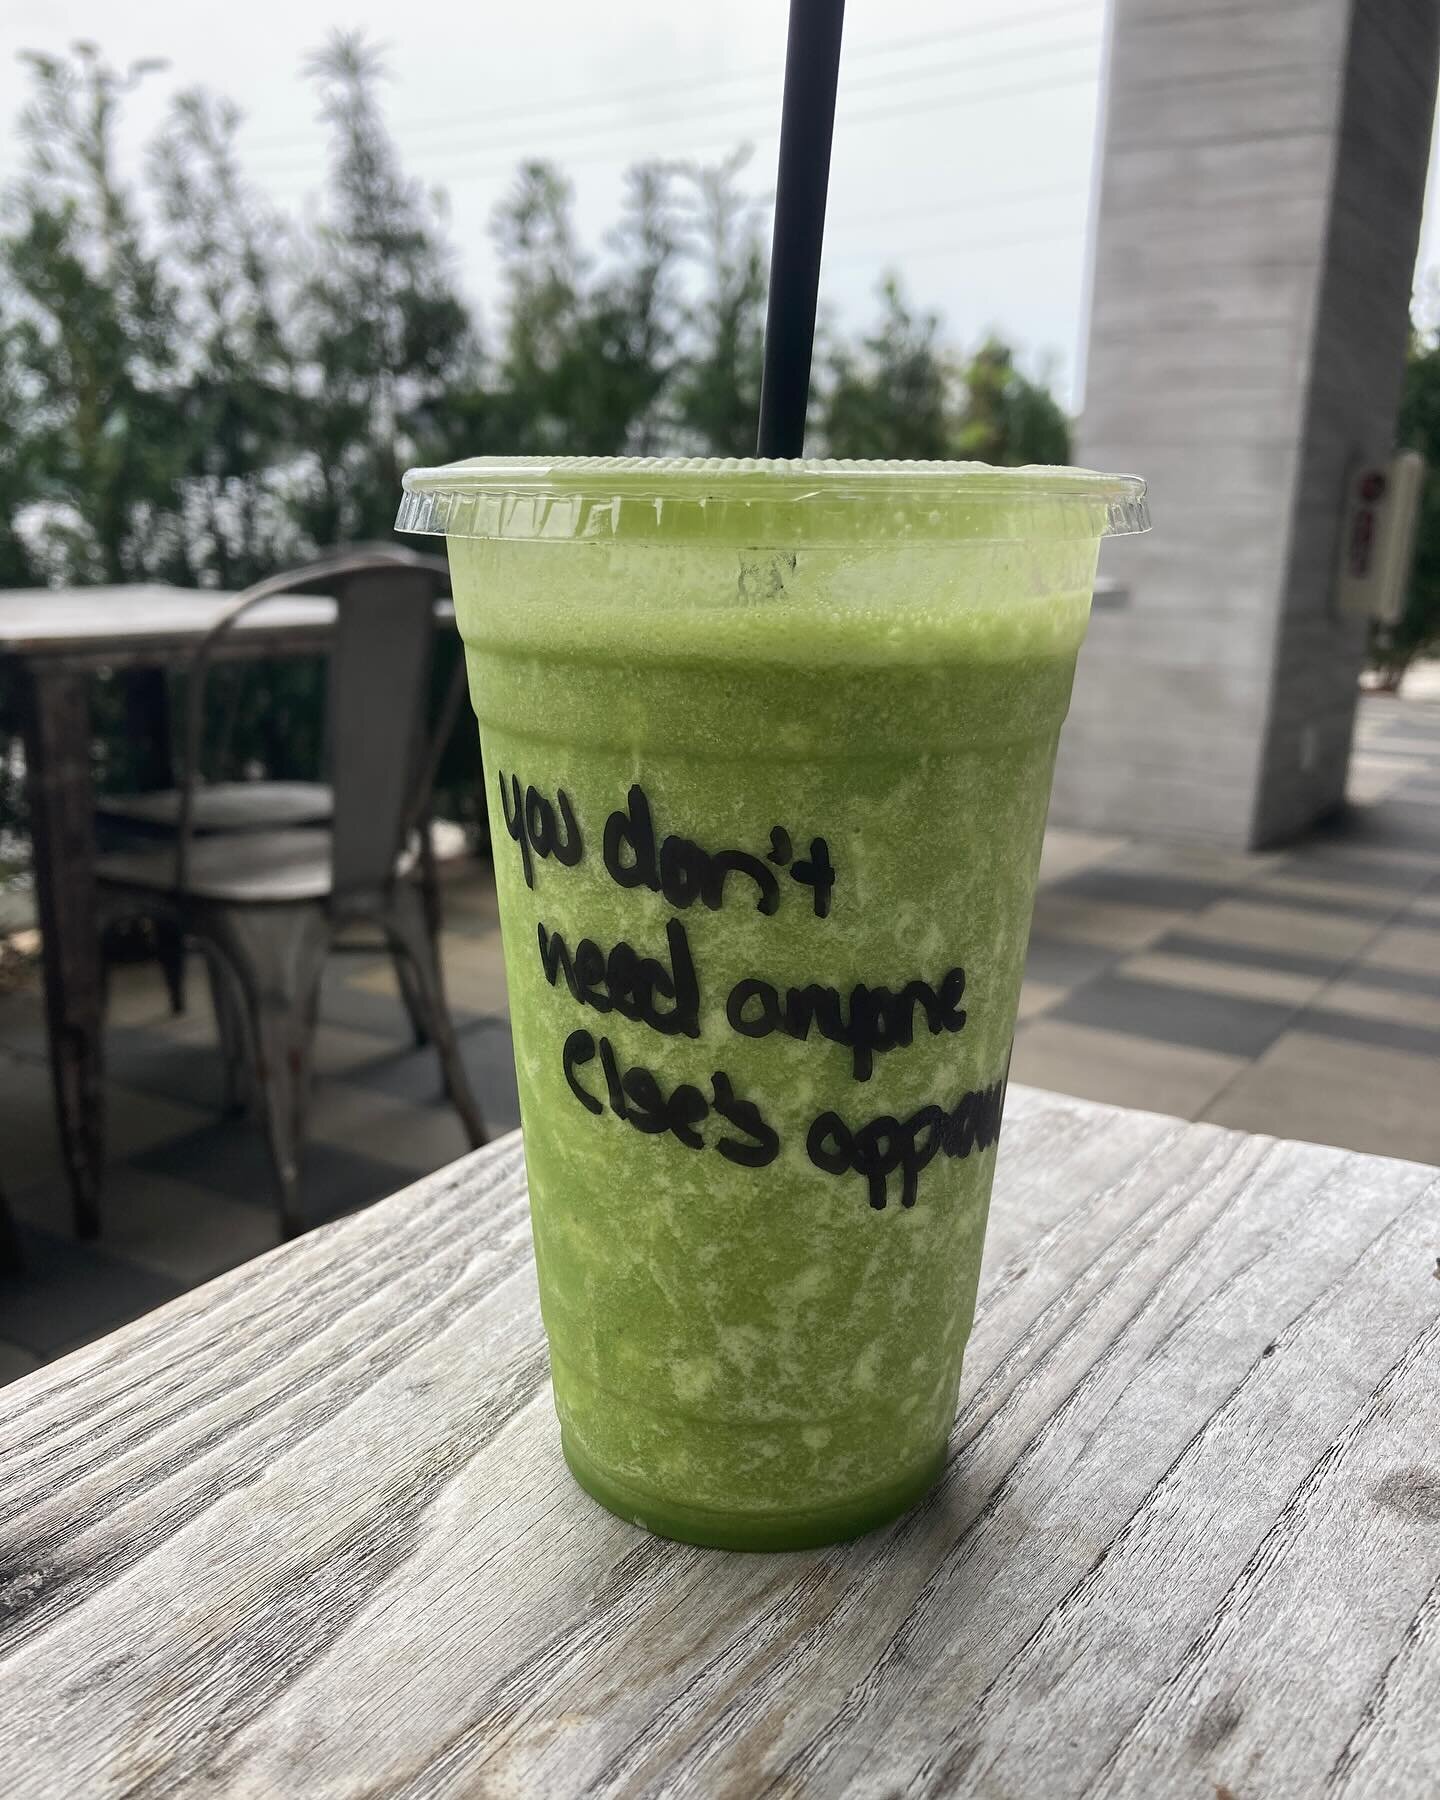 You don&rsquo;t need anyone else&rsquo;s approval because it&rsquo;s 
never not a great time for a green smoothie! 

The Boss 

- kale 🍃

-spinach 🥬

-cucumber 🥒

-lemon🍋

-pineapple 🍍

-banana 🍌 

#mindfulness #healthylifestyle #mindbodysoul #